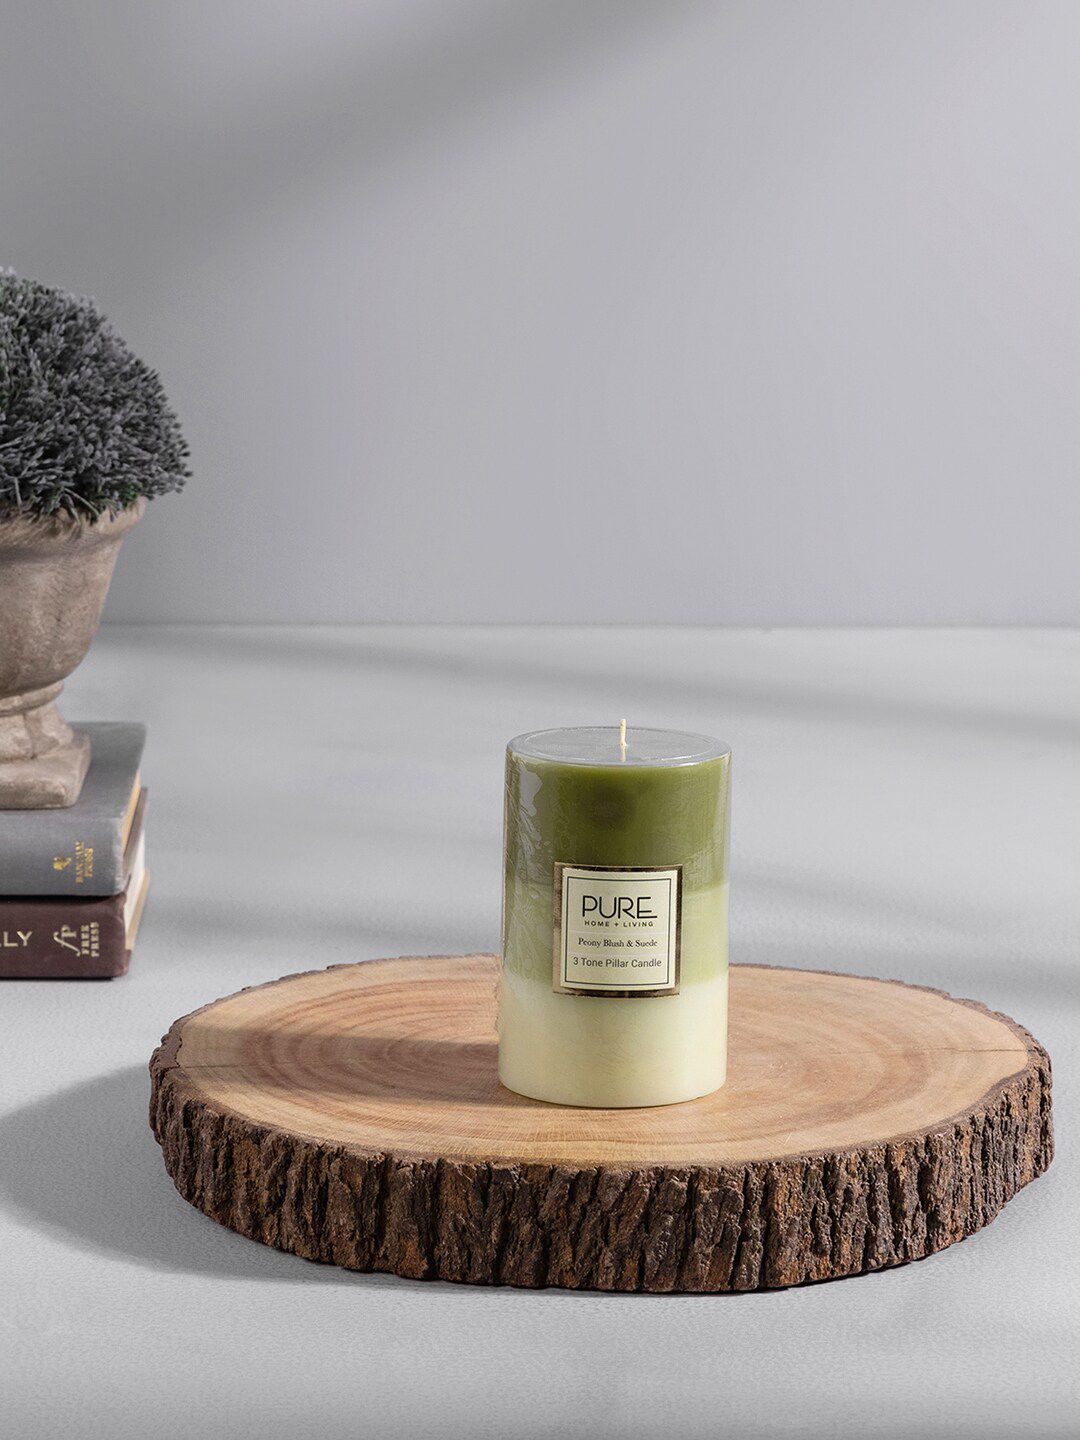 Pure Home and Living Green Ombre Peony Blush & Suede Tall Pillar Candle Price in India